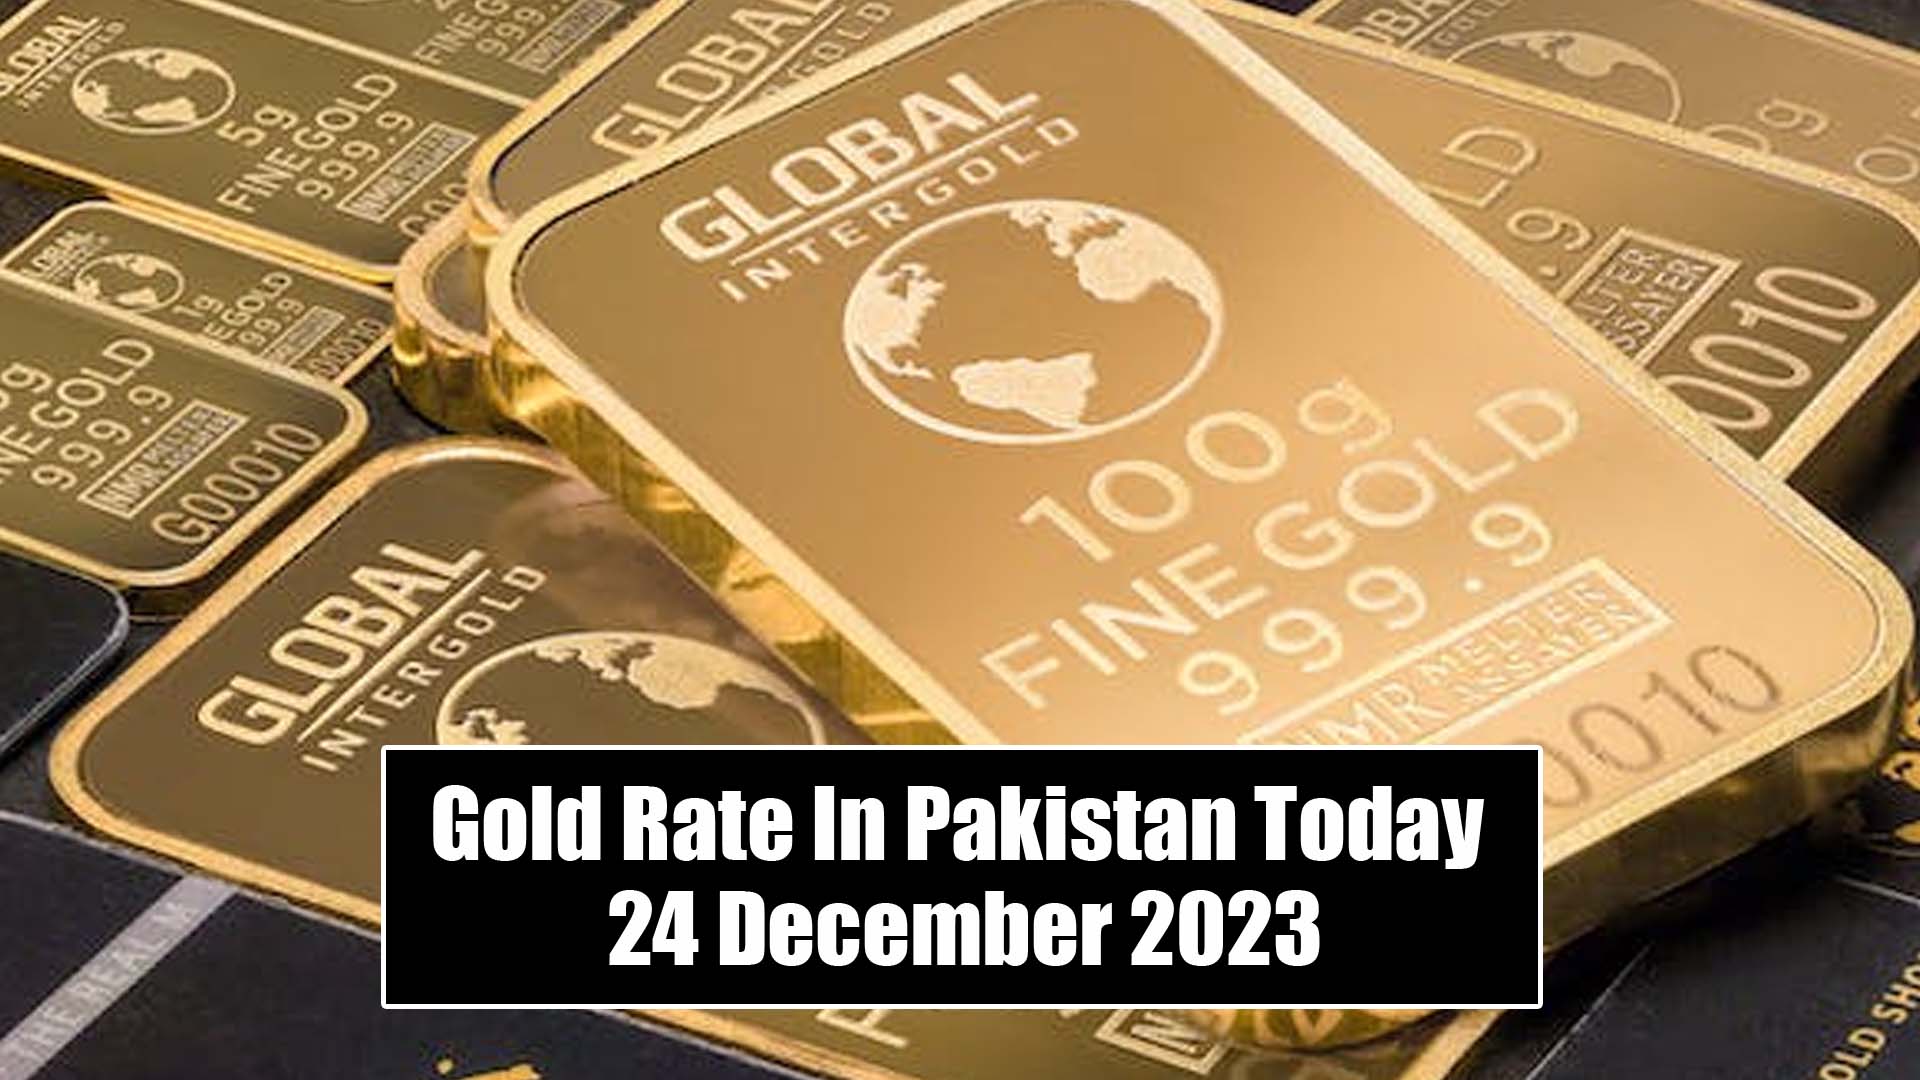 Gold Rate In Pakistan Today 24 December 2023